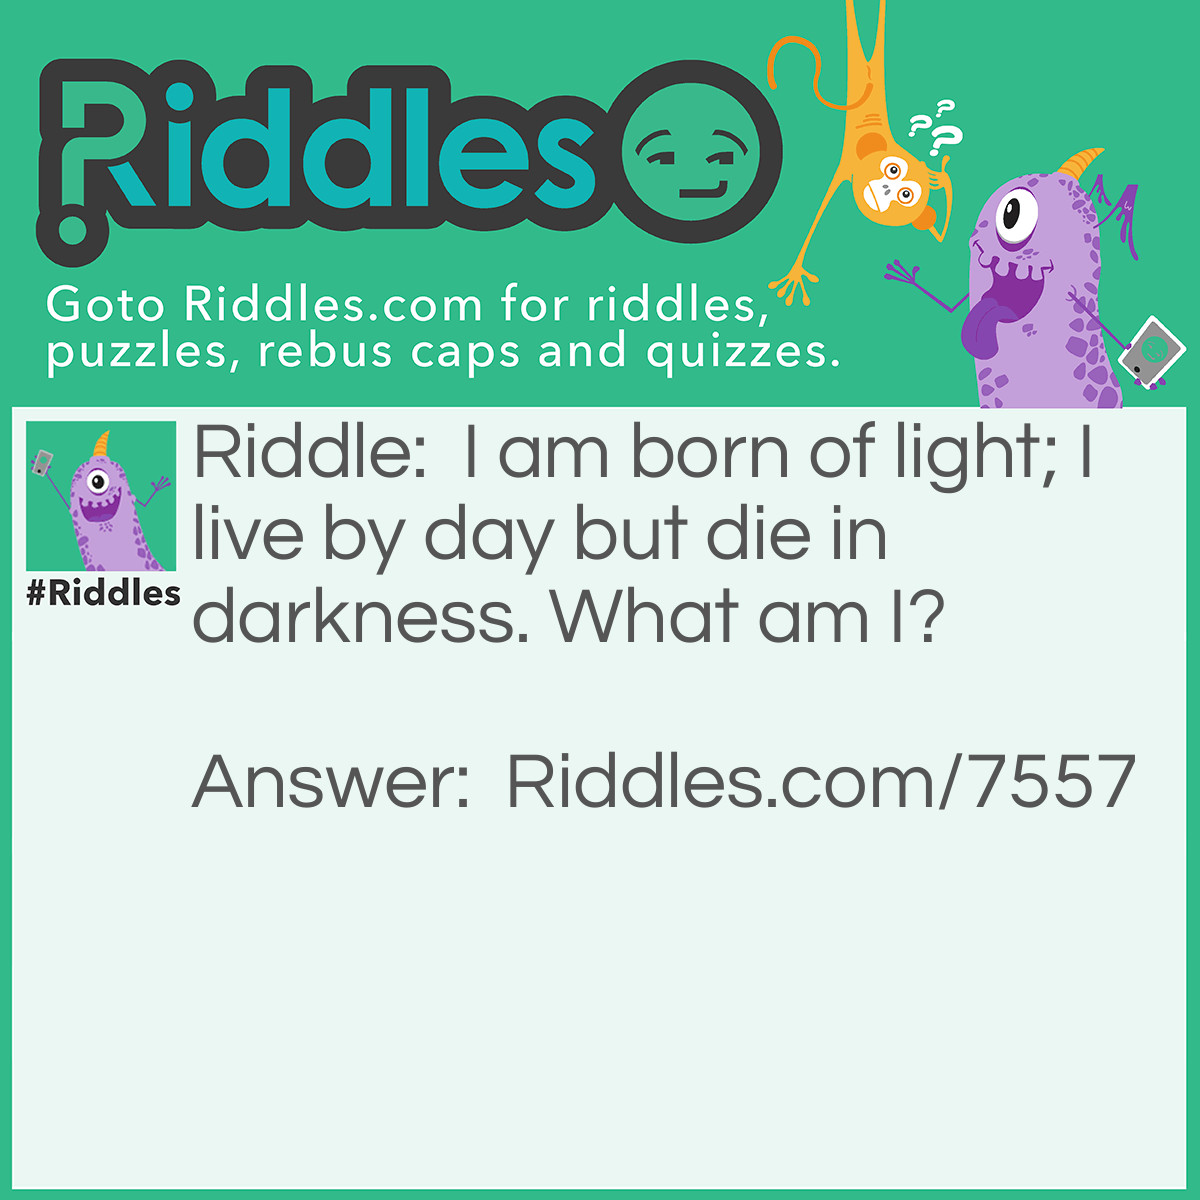 Riddle: I am born of light; I live by day but die in darkness. What am I? Answer: Shadows